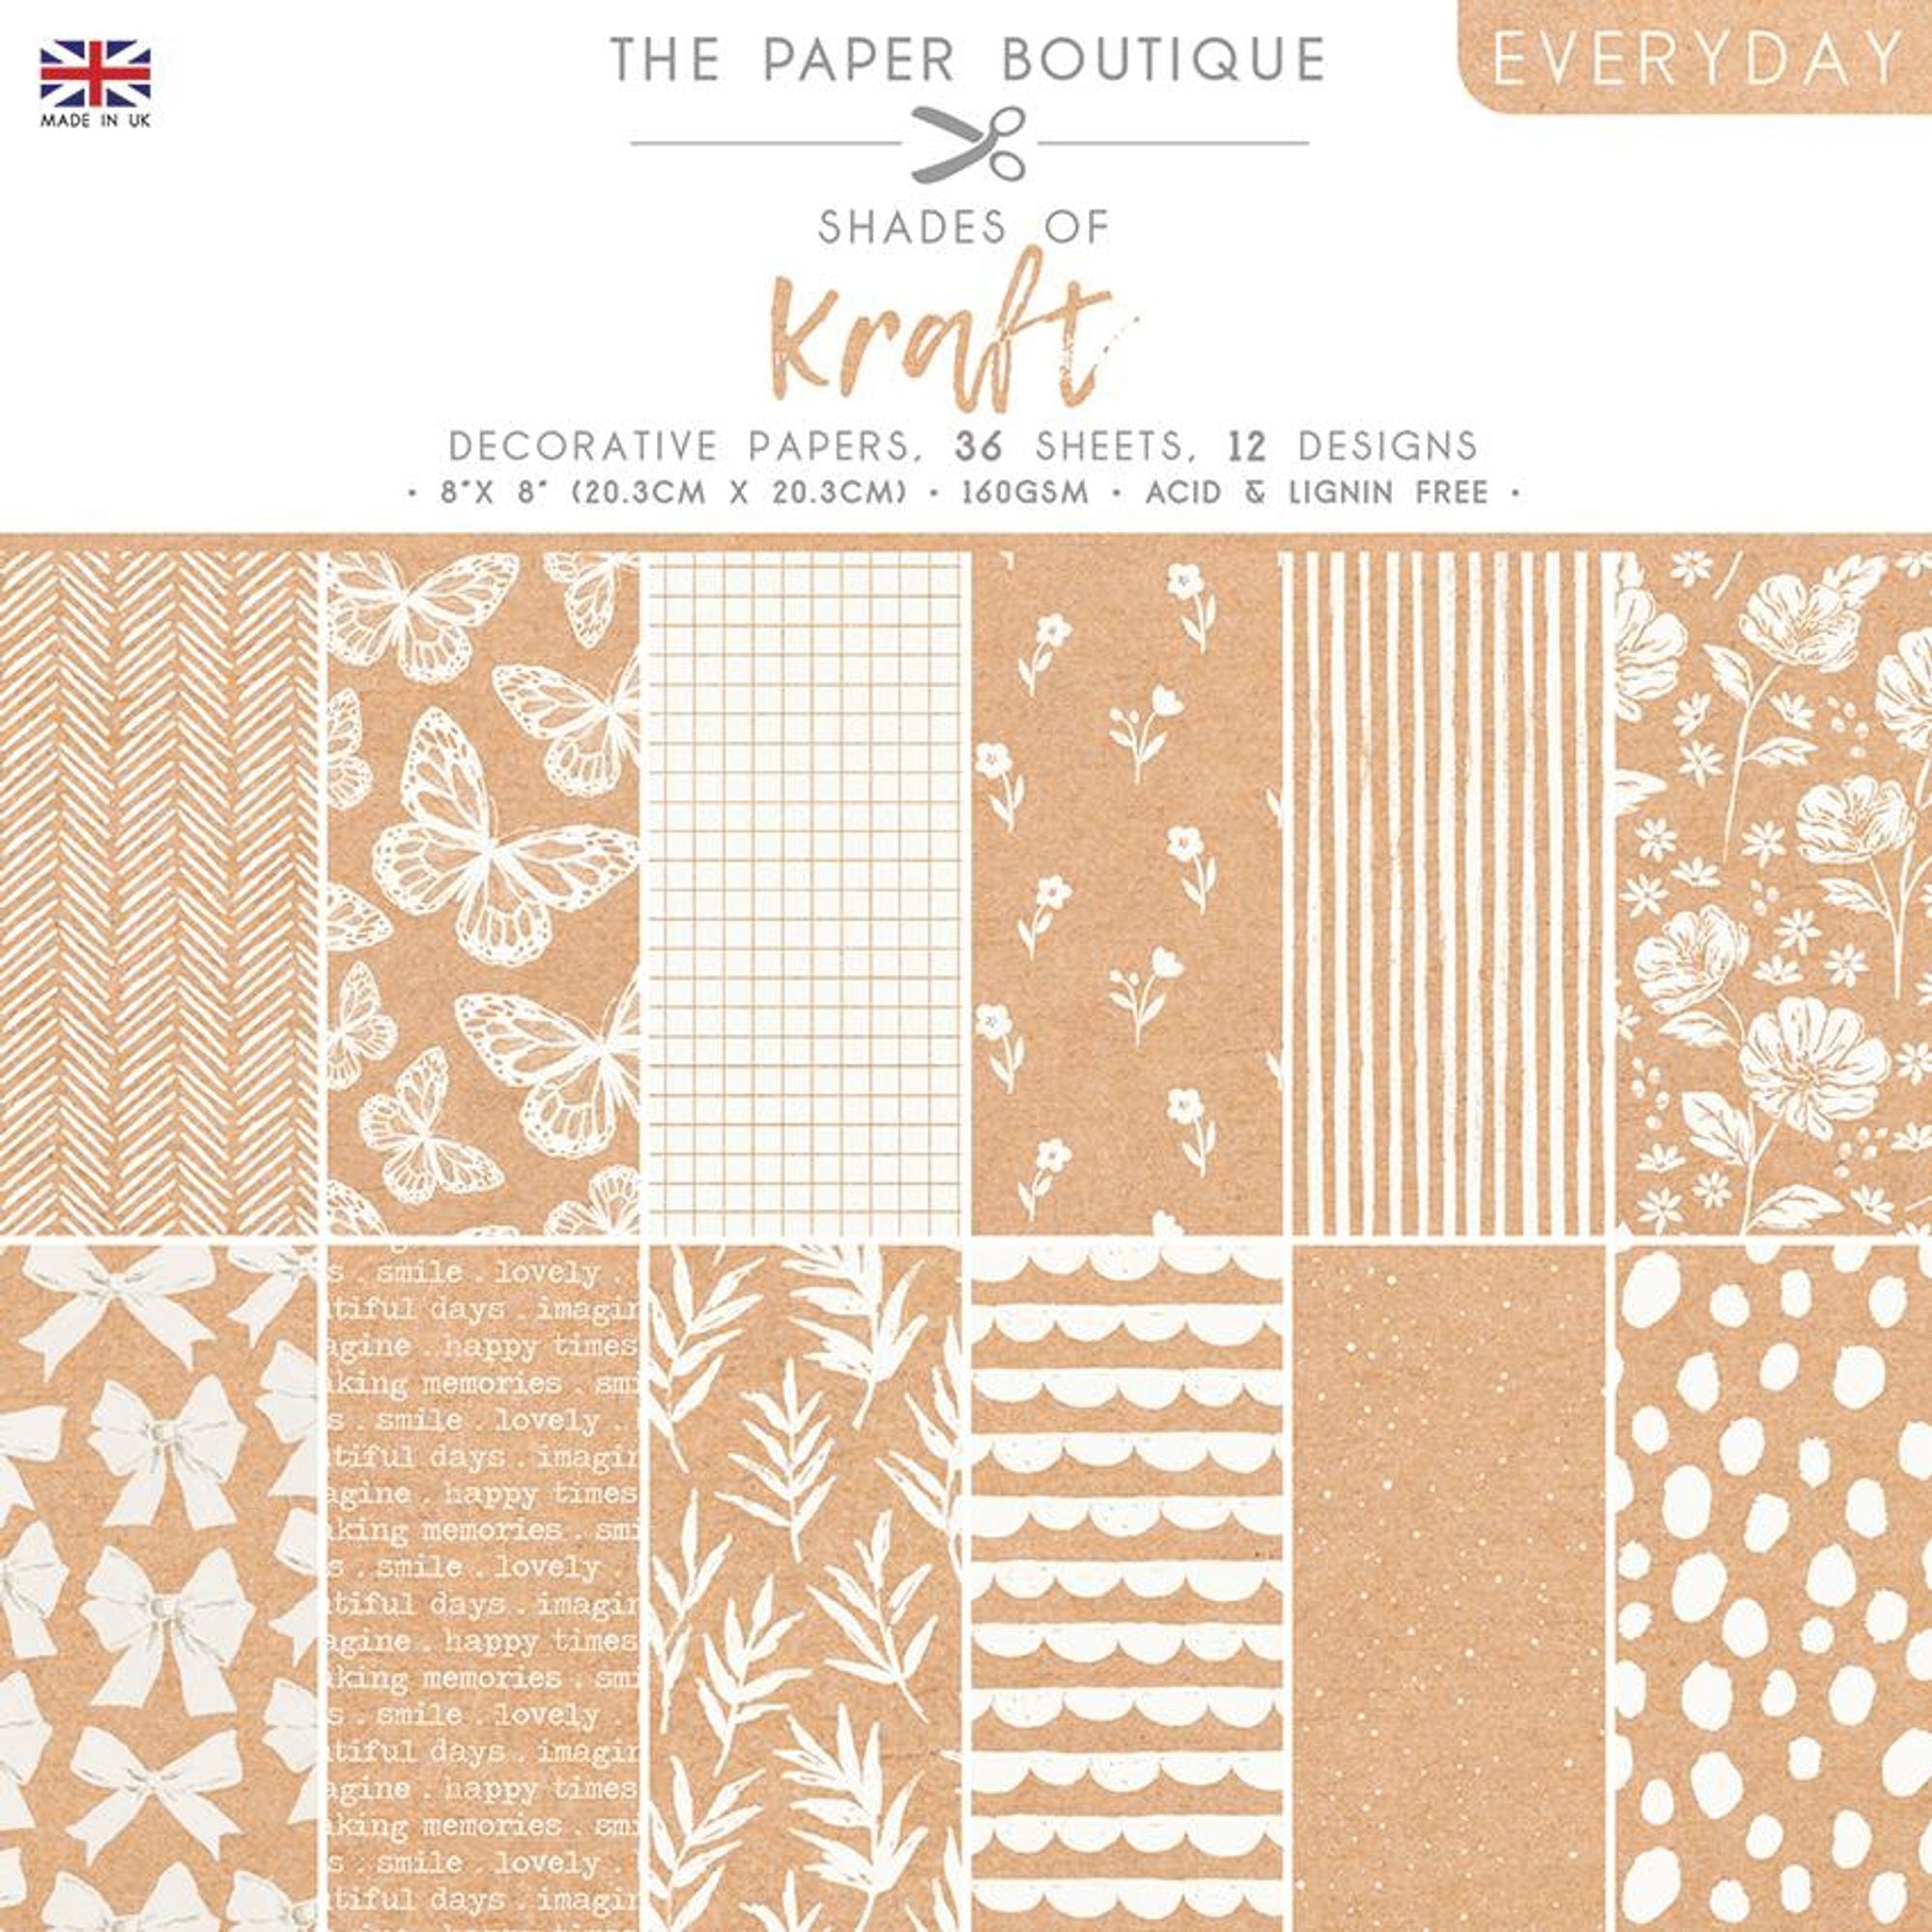 The Paper Boutique Everyday - Shades Of - Kraft 8 in x 8 in Pad